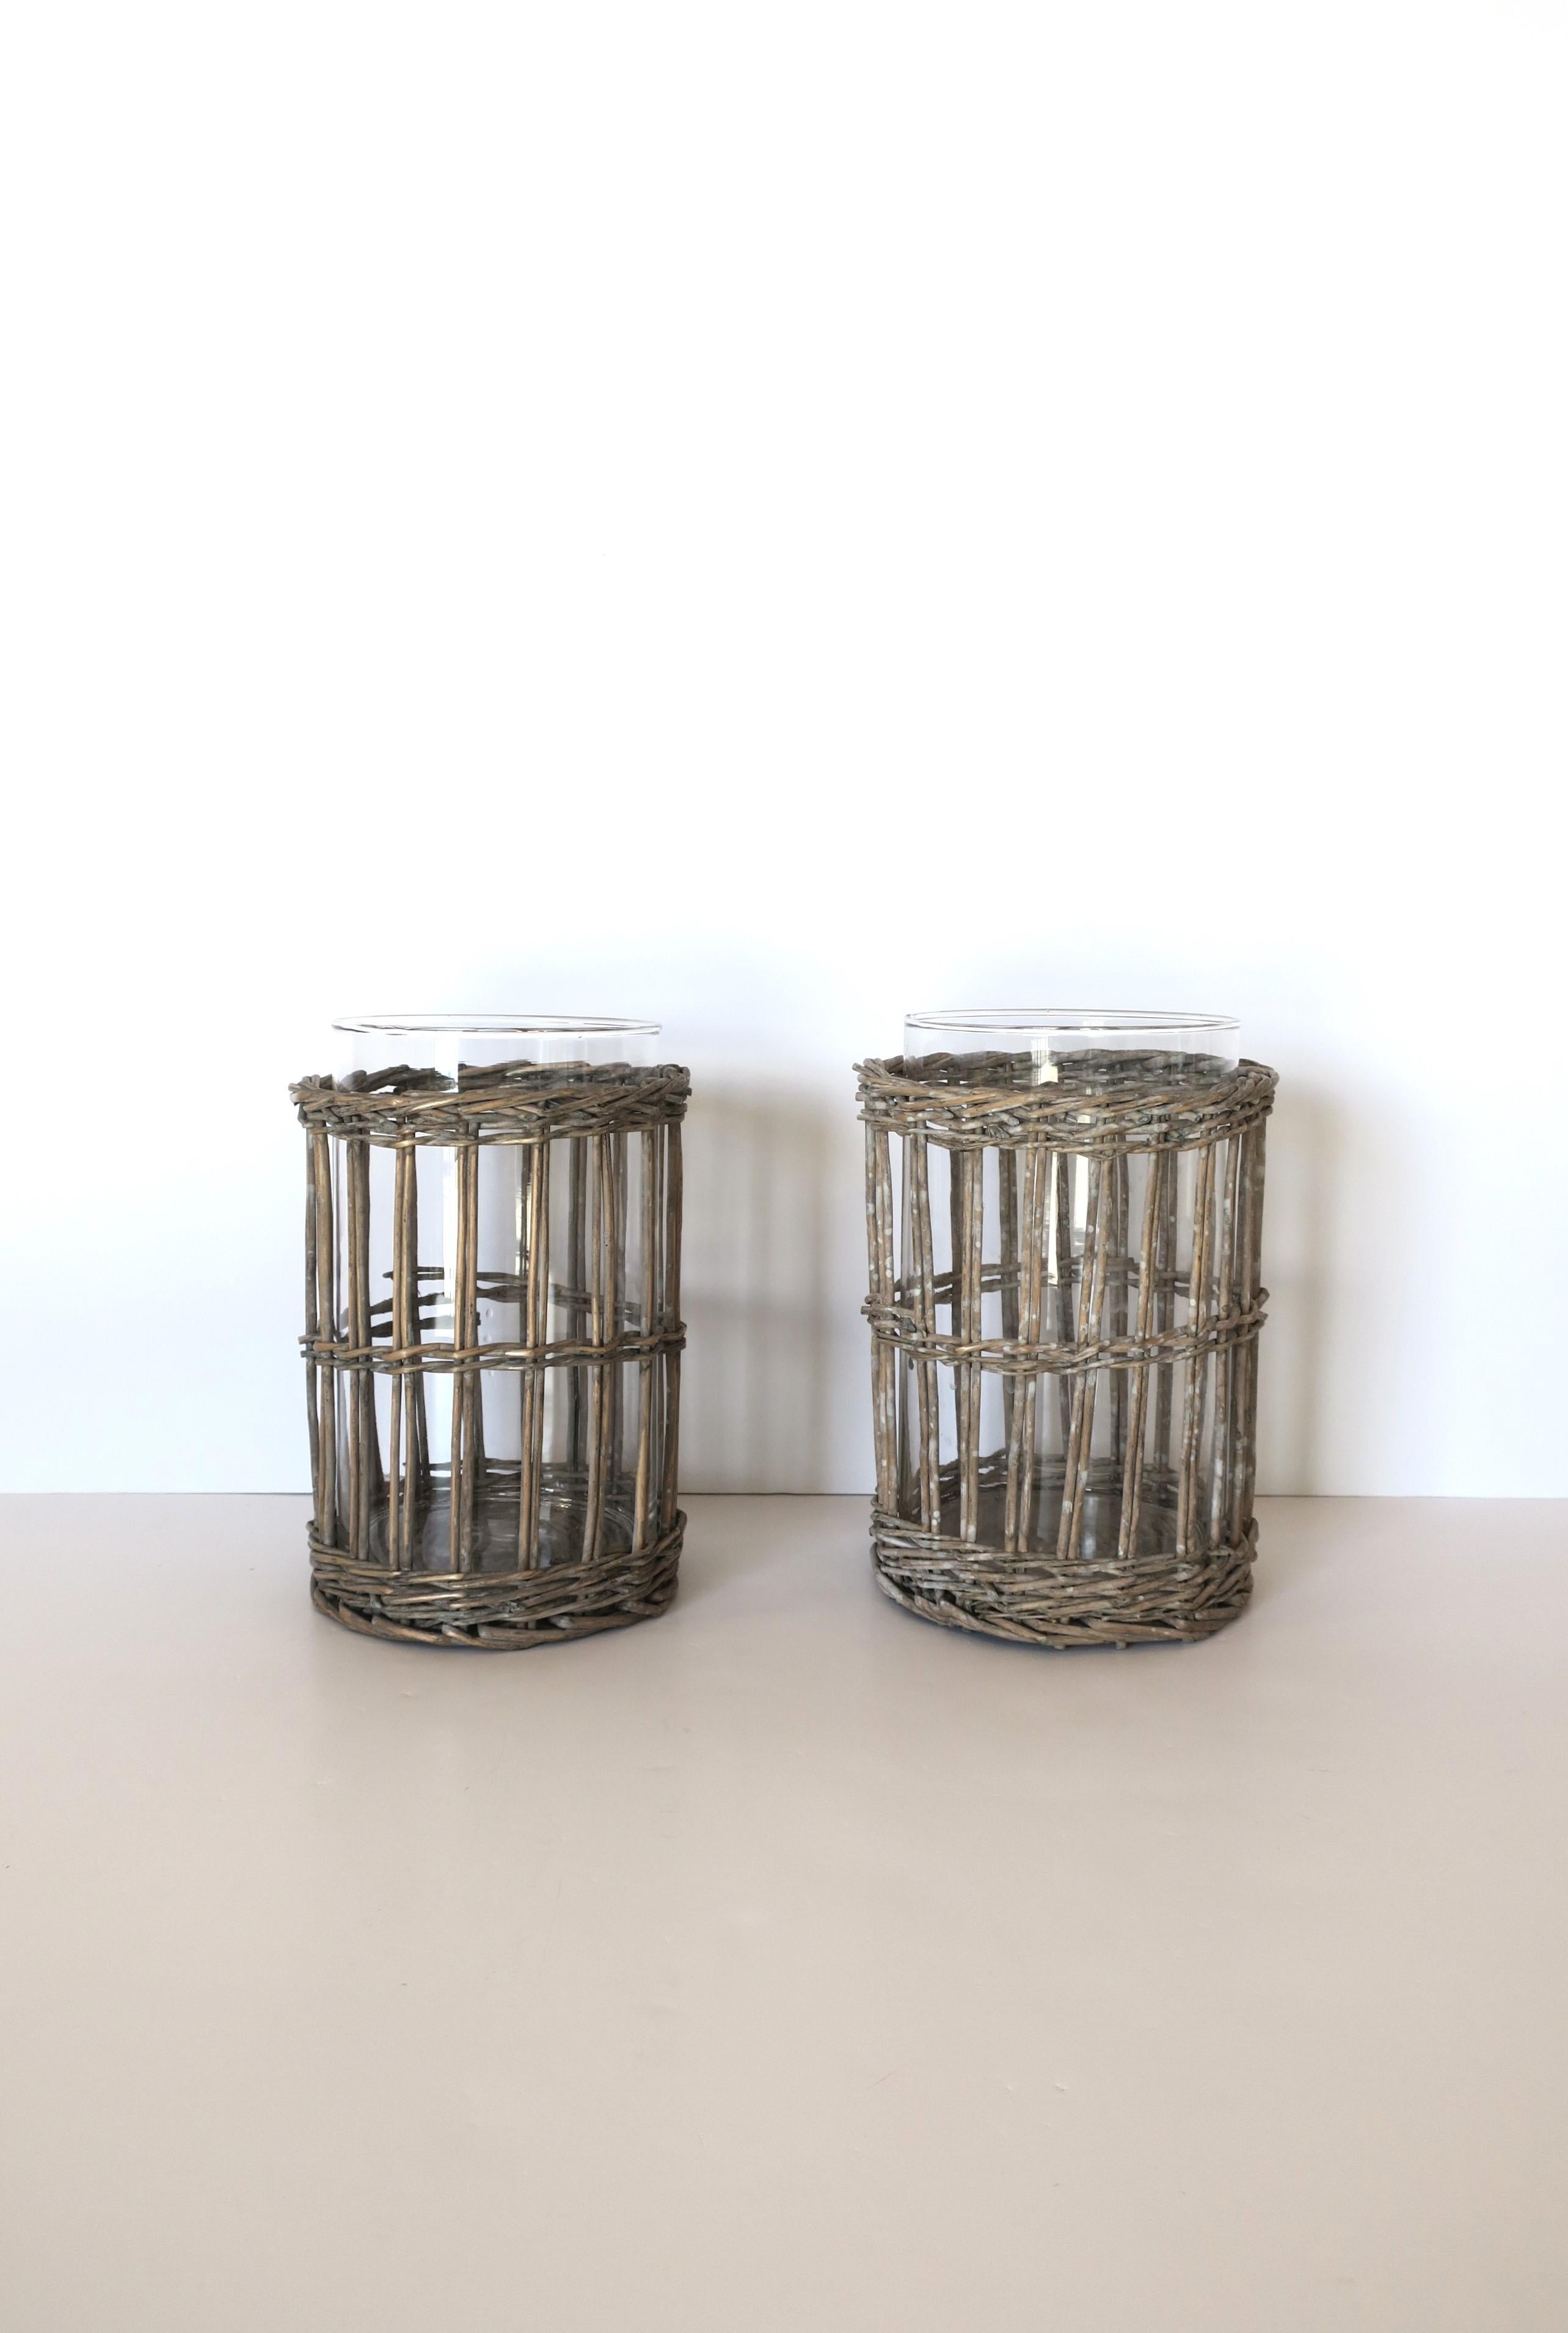 A set of two (2) wicker twig and glass hurricane candle lamps. A great set for indoors or out; dining table, steps, walkway, patio, terrace, etc. Dimensions: 6